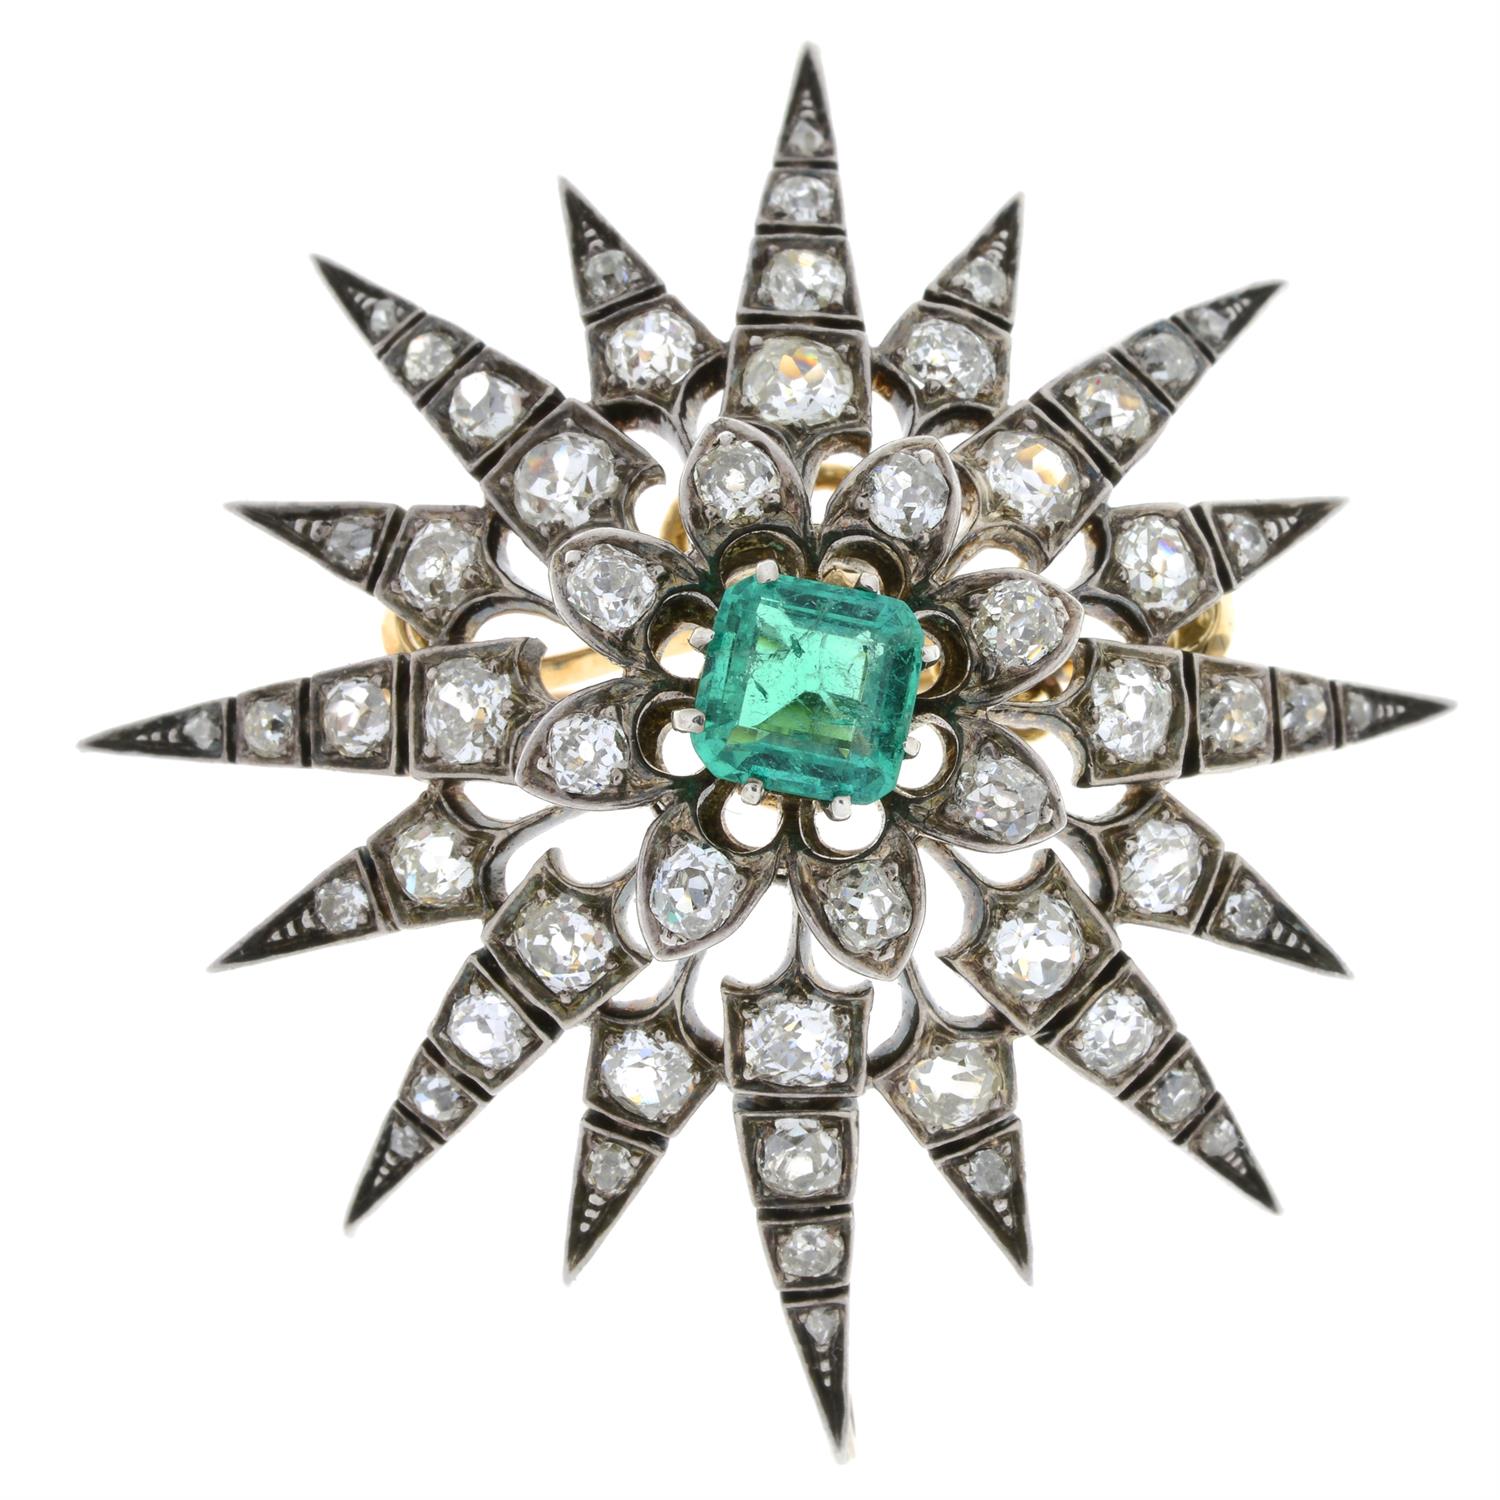 Victorian emerald and diamond star brooch - Image 2 of 5